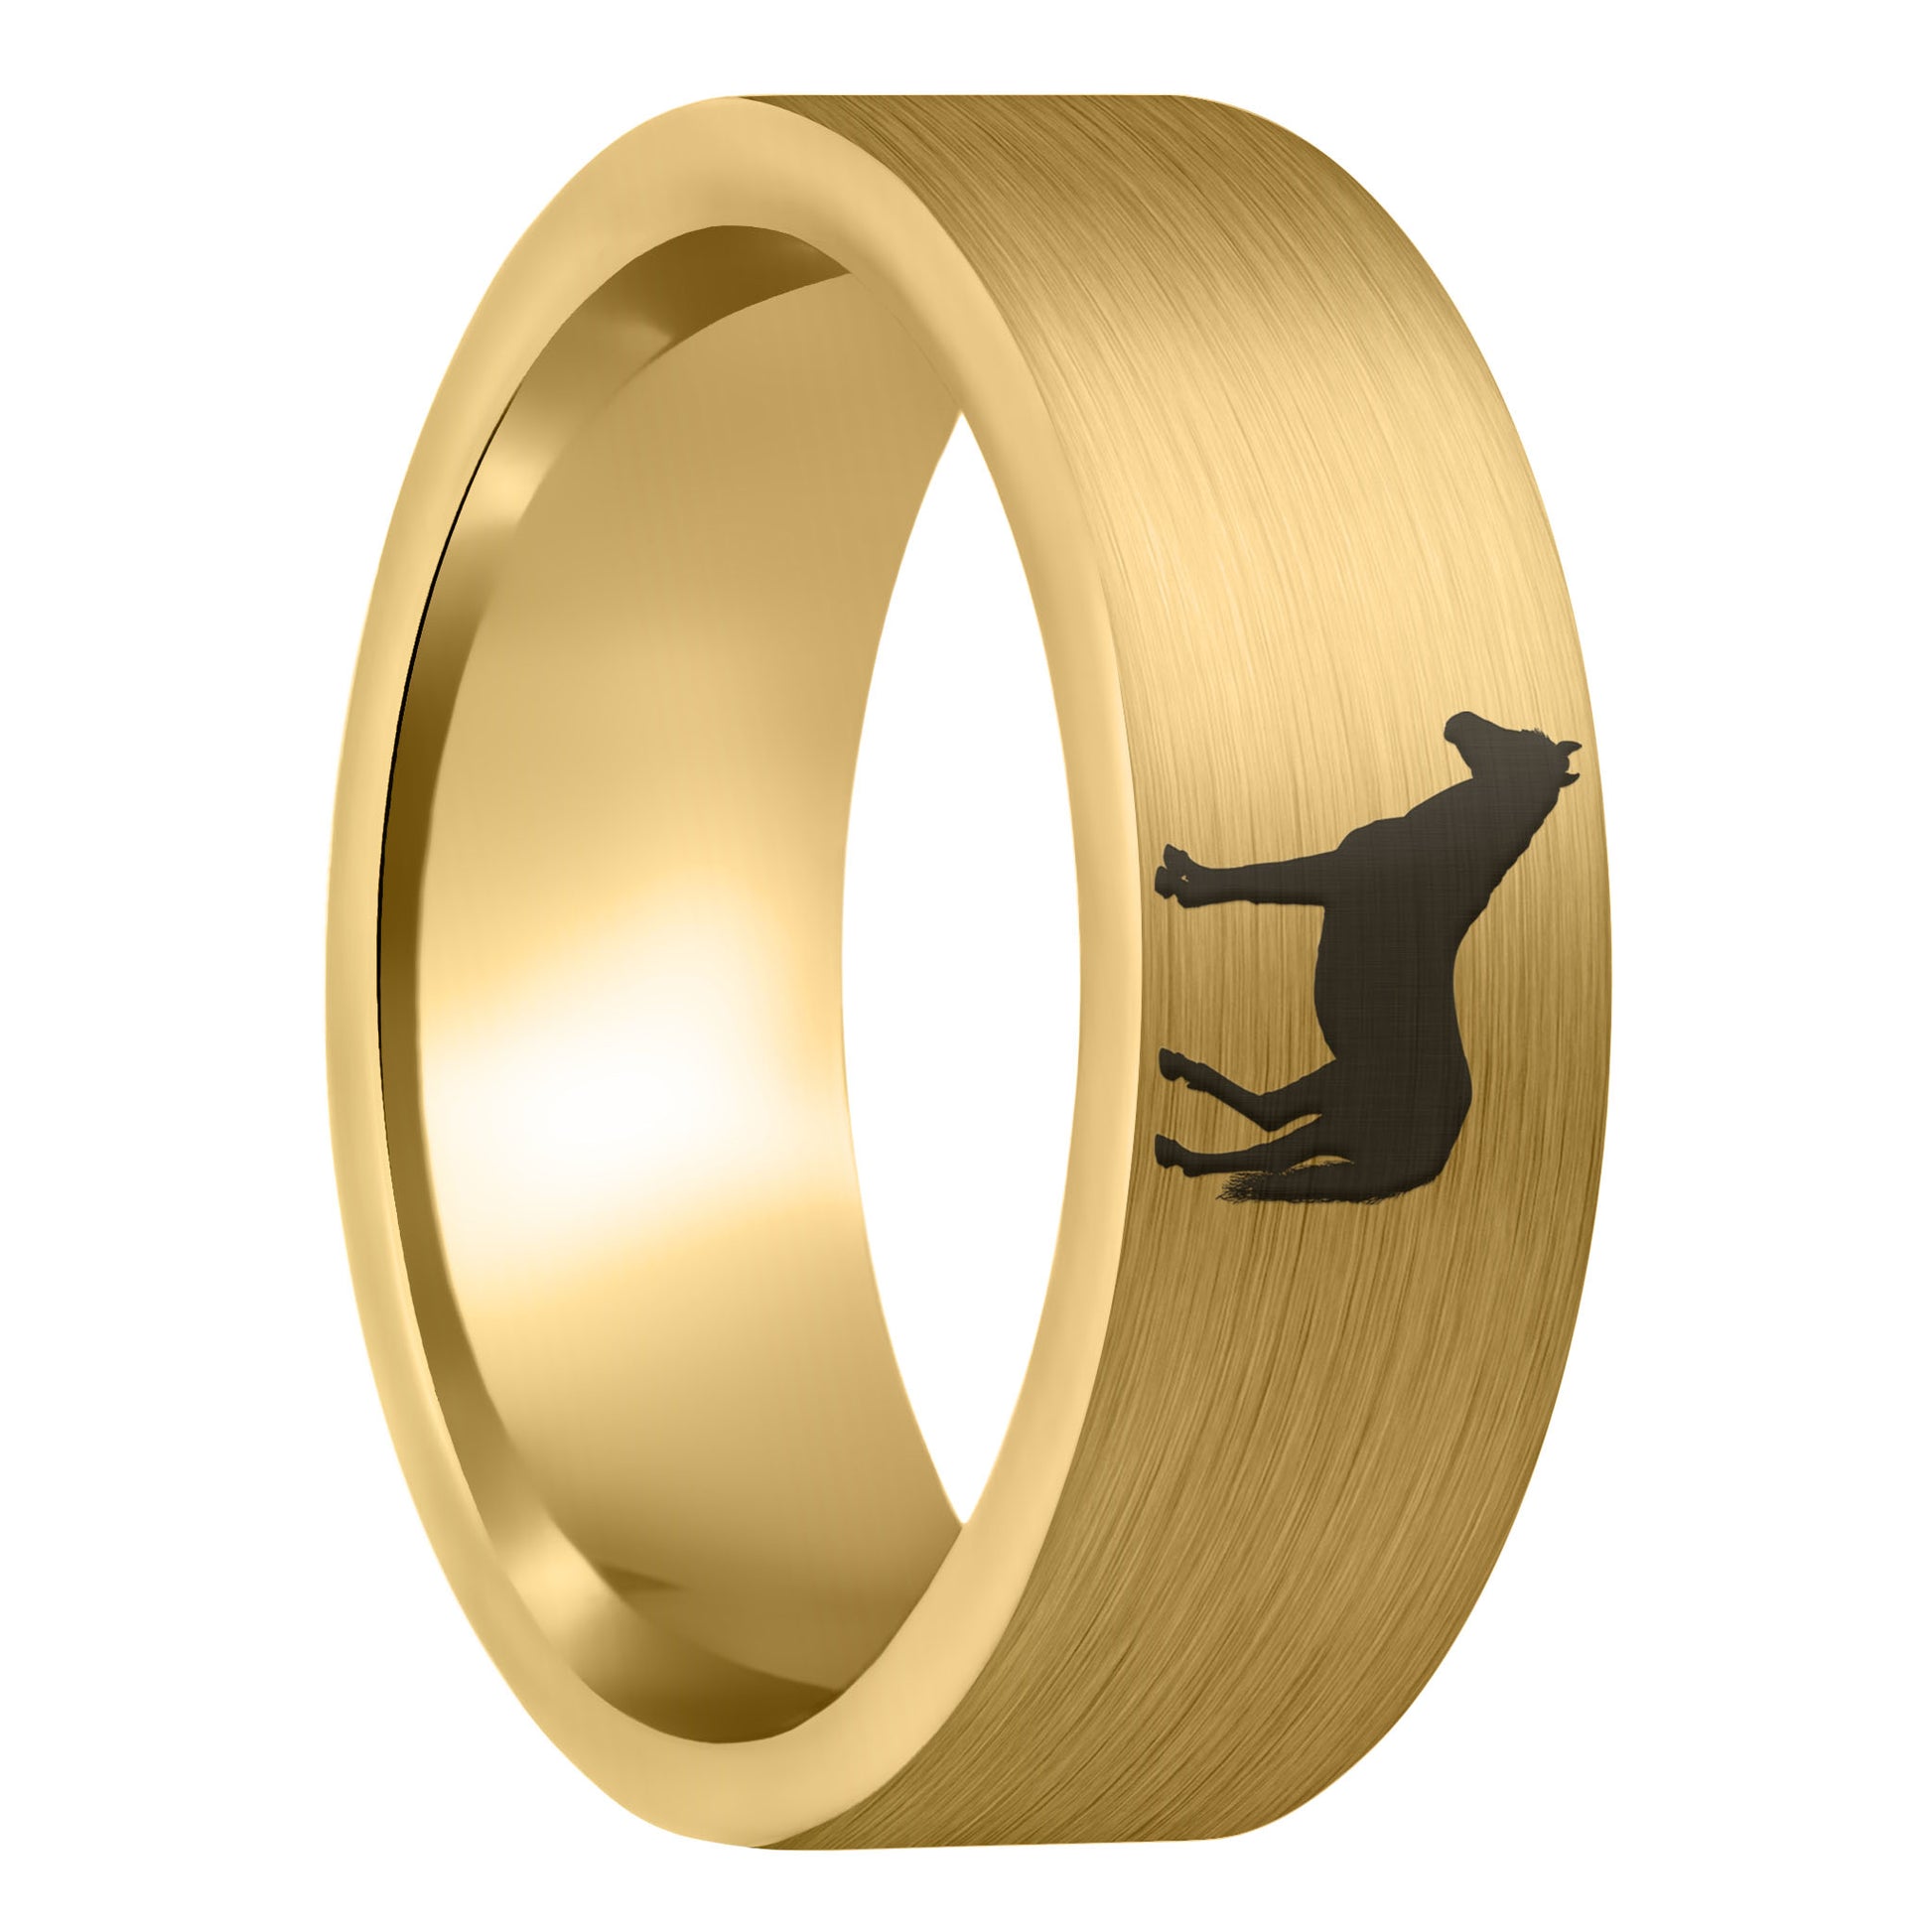 A horse brushed gold tungsten men's wedding band displayed on a plain white background.